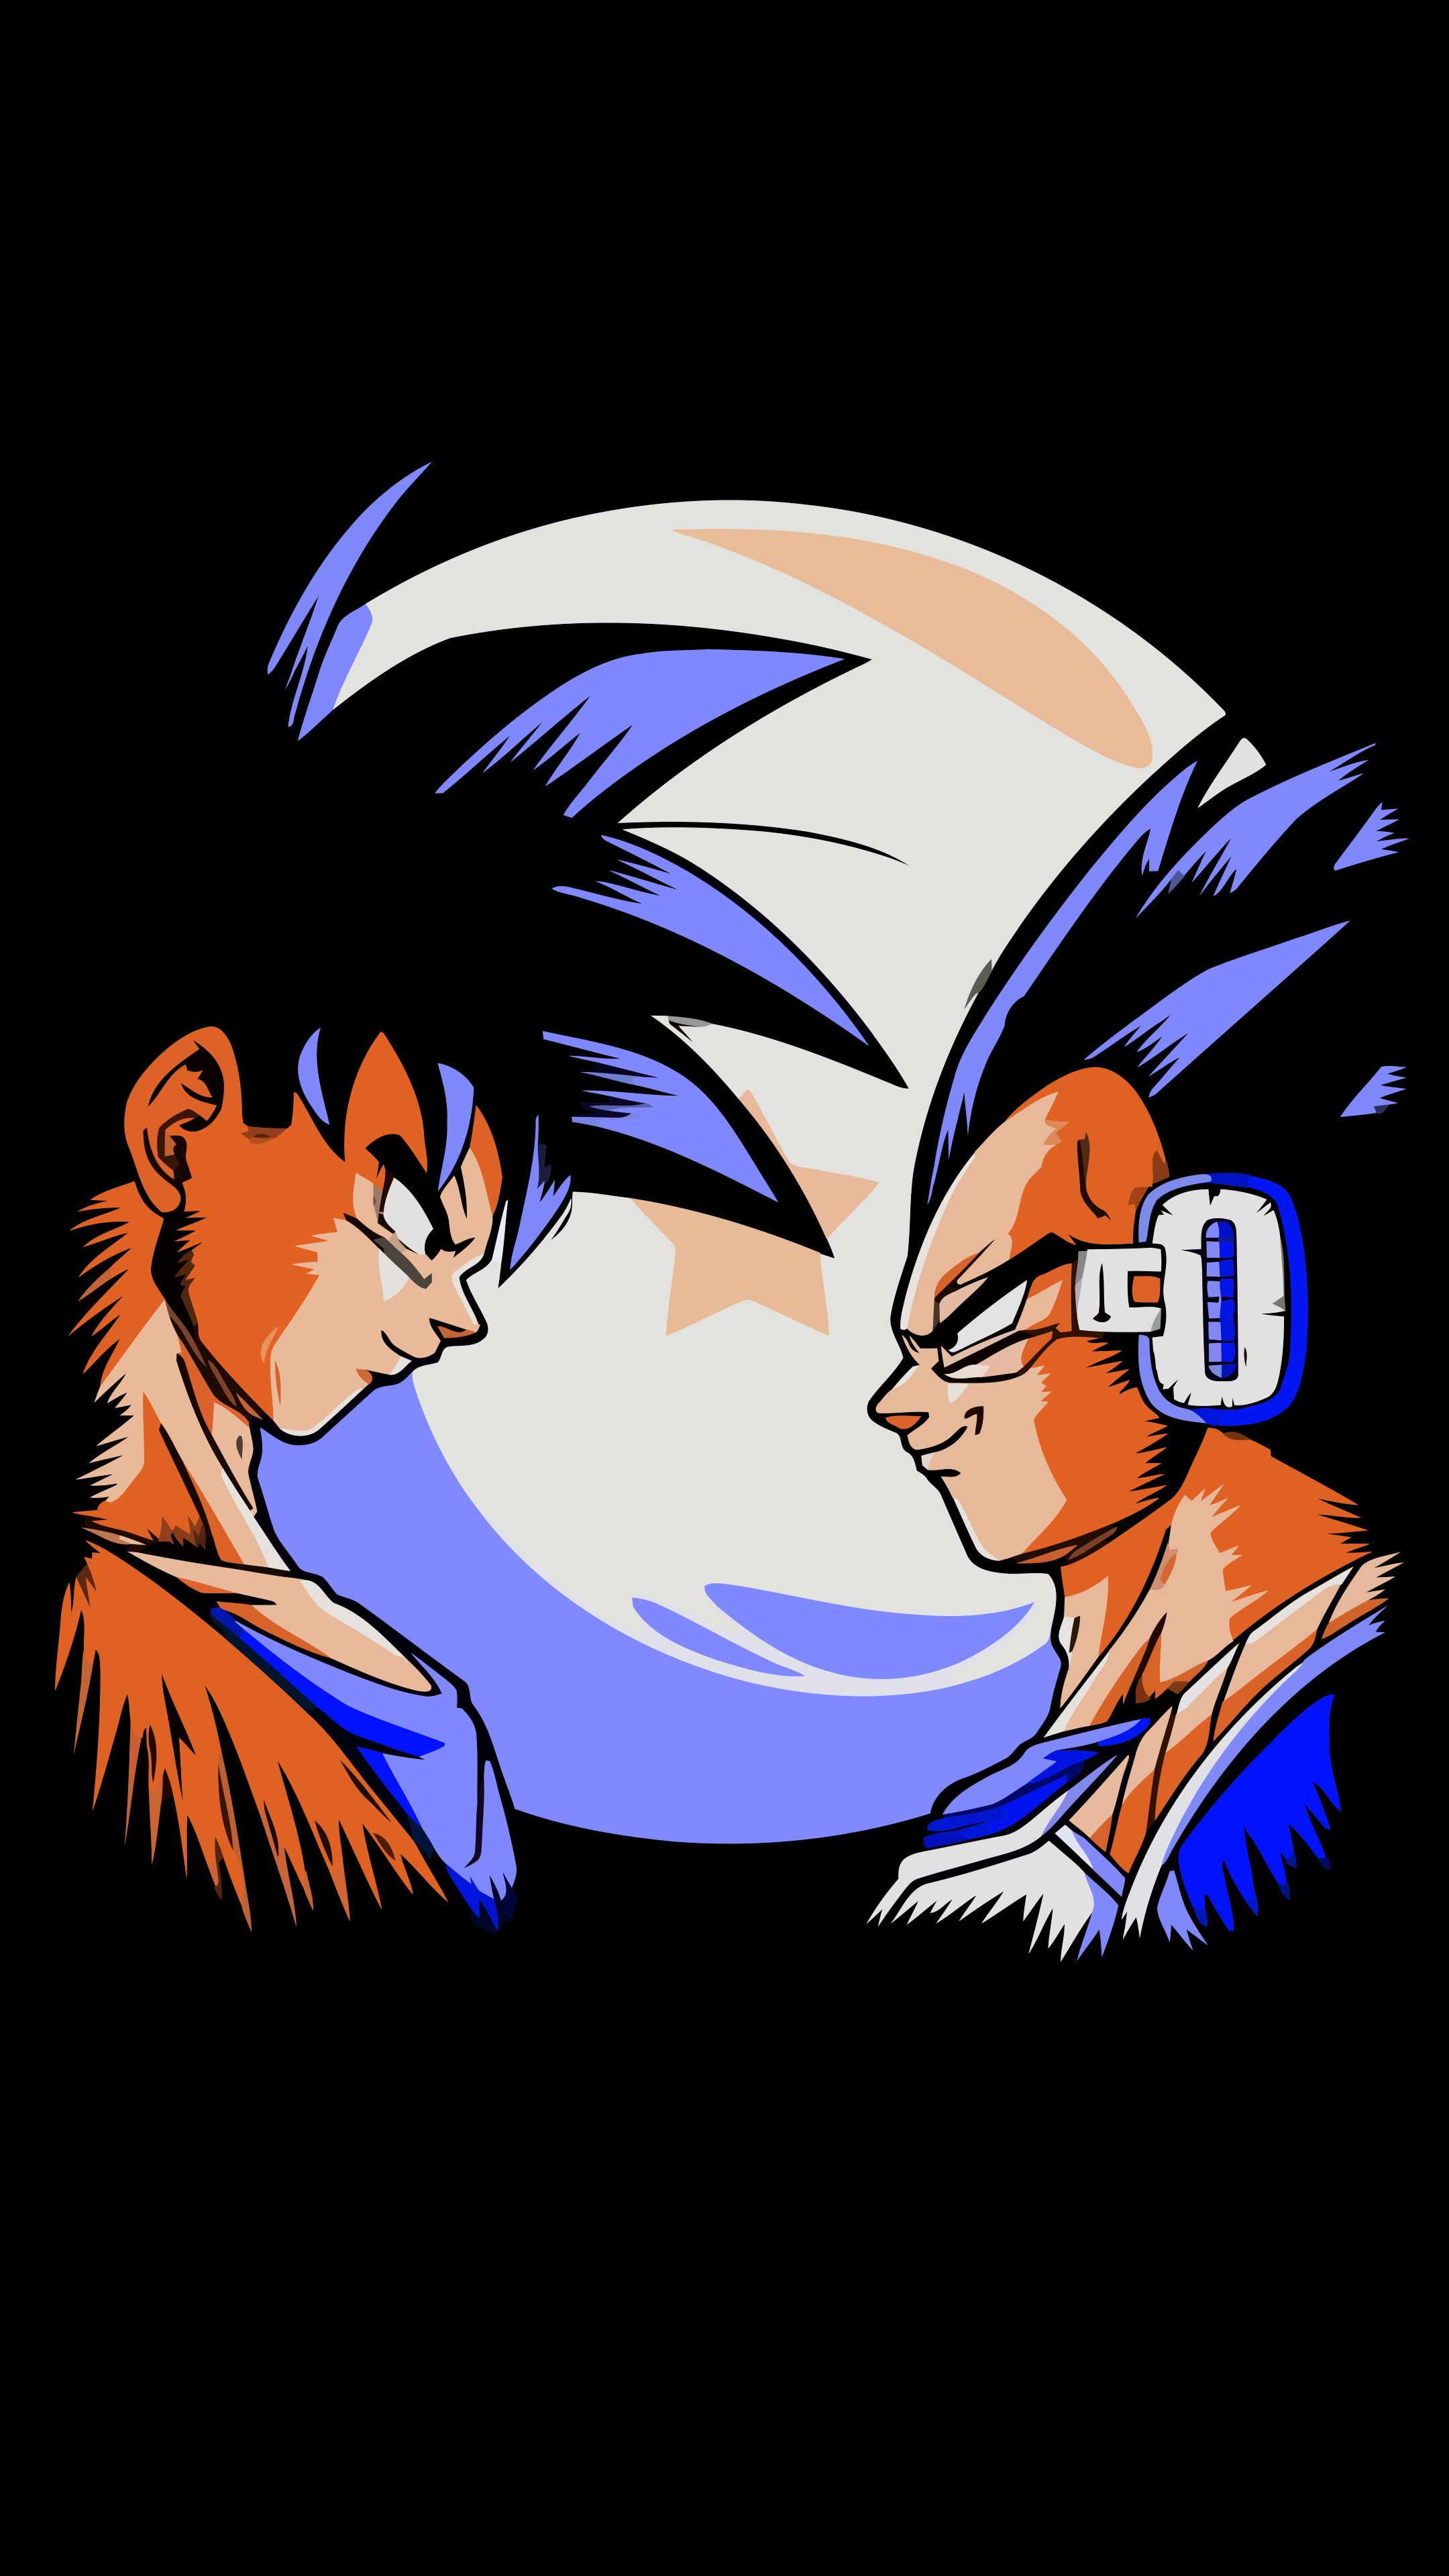 Download Dragon Ball Z wallpapers for iPhone in 2023 - iGeeksBlog  Dragon  ball z iphone wallpaper, Dragon ball super wallpapers, Dragon ball artwork